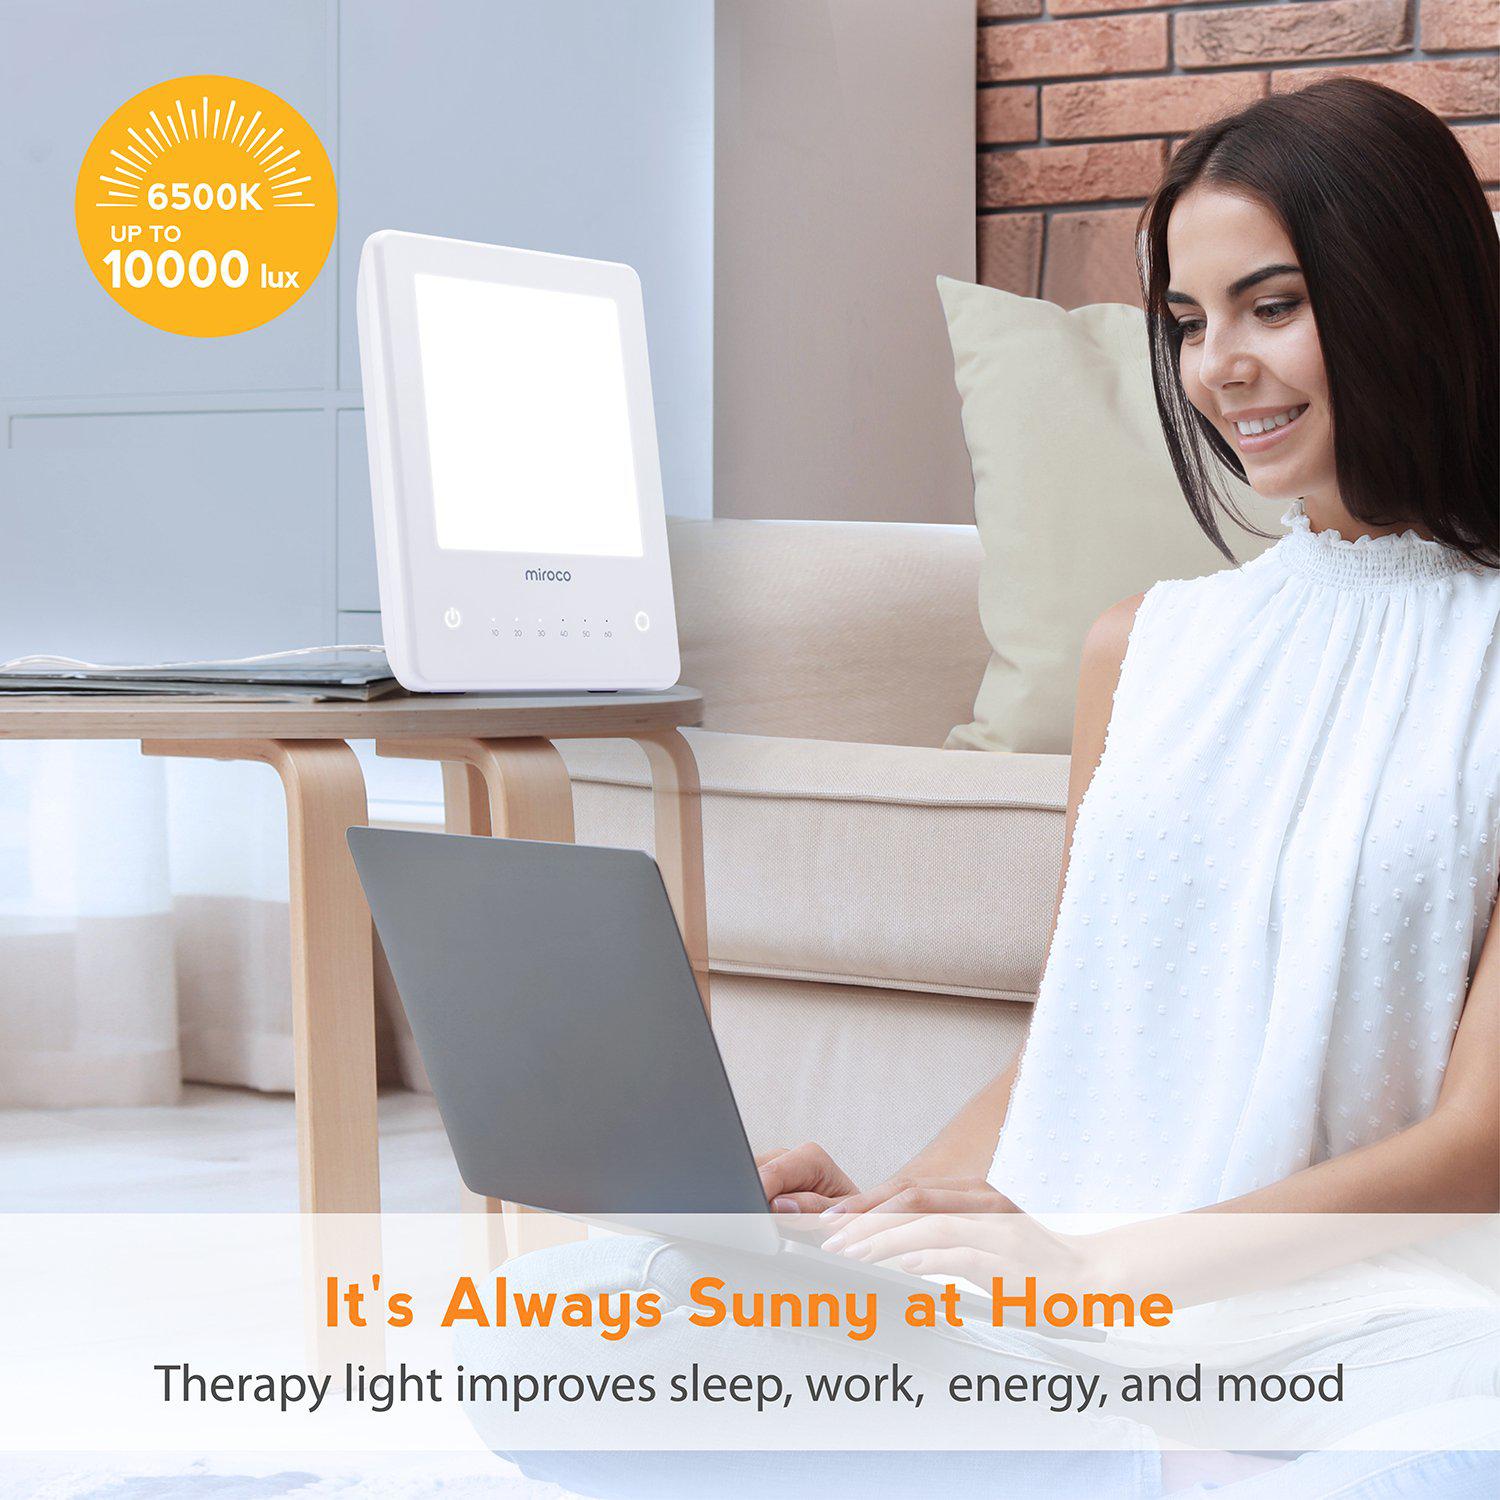 Products Light Therapy Lamp, Miroco UV Free 10000 Lux Therapy Lamp